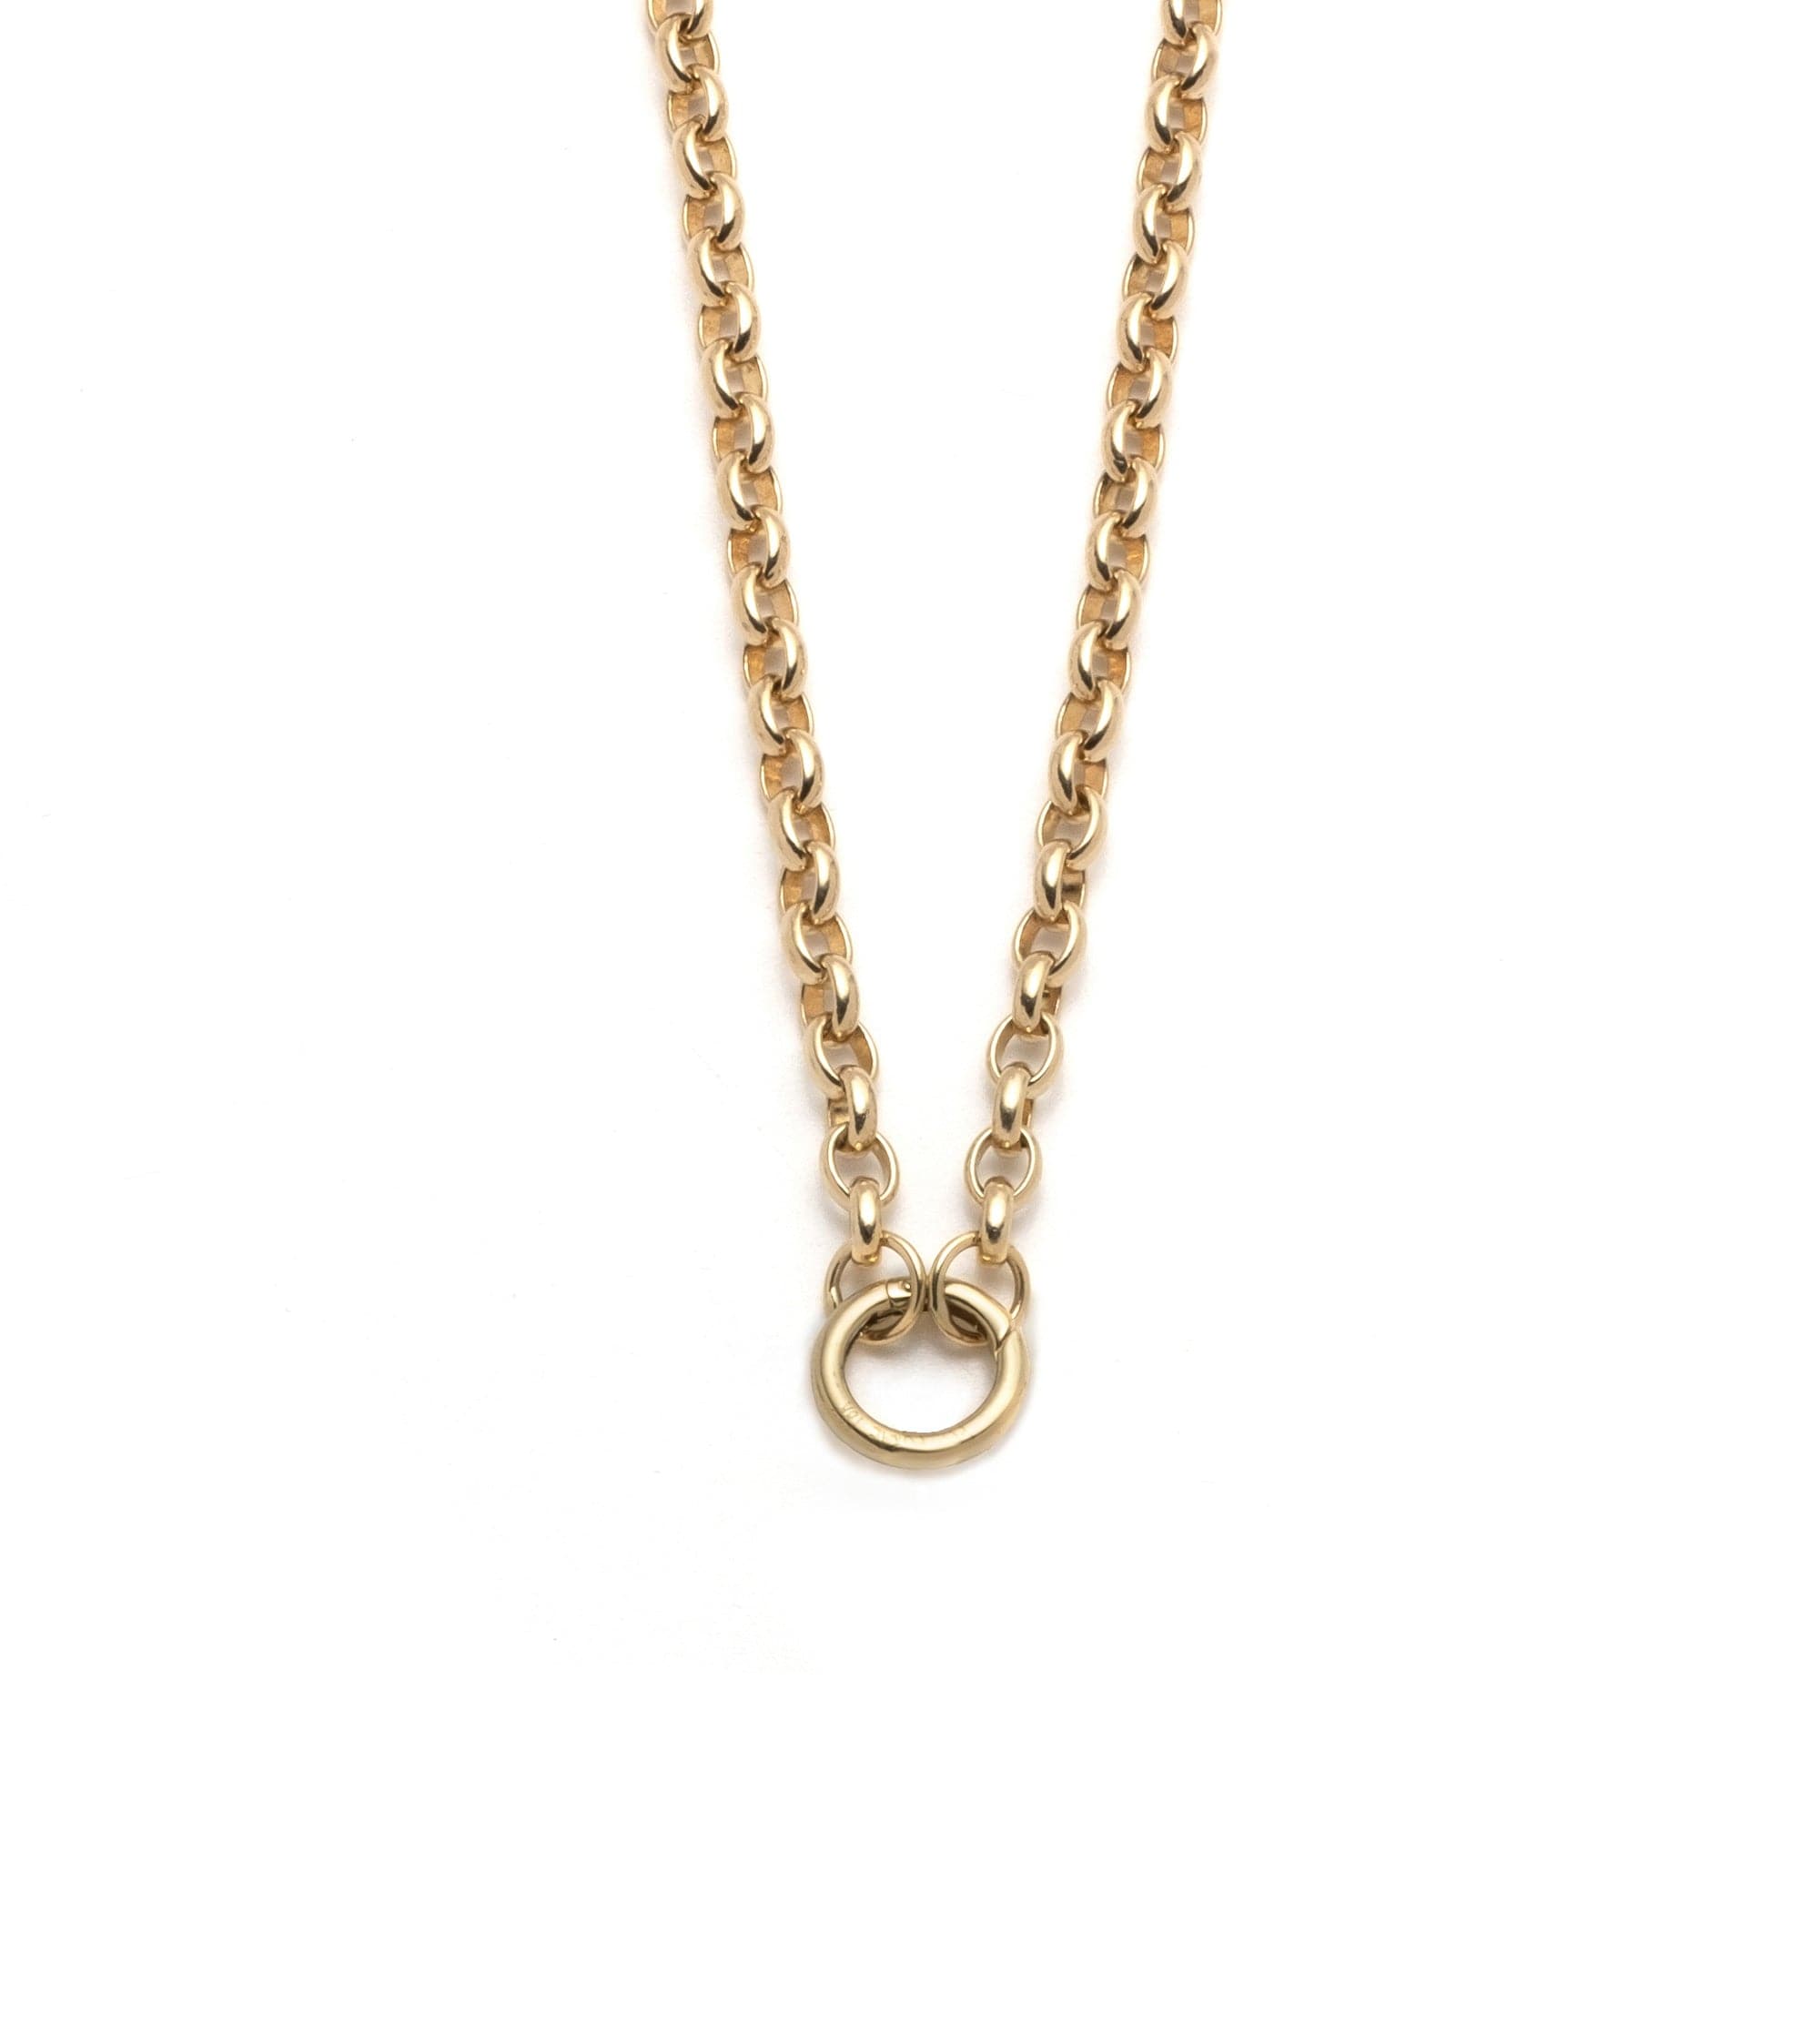 Belcher Chain Necklaces - 18K Gold Chains & Extensions – FoundRae